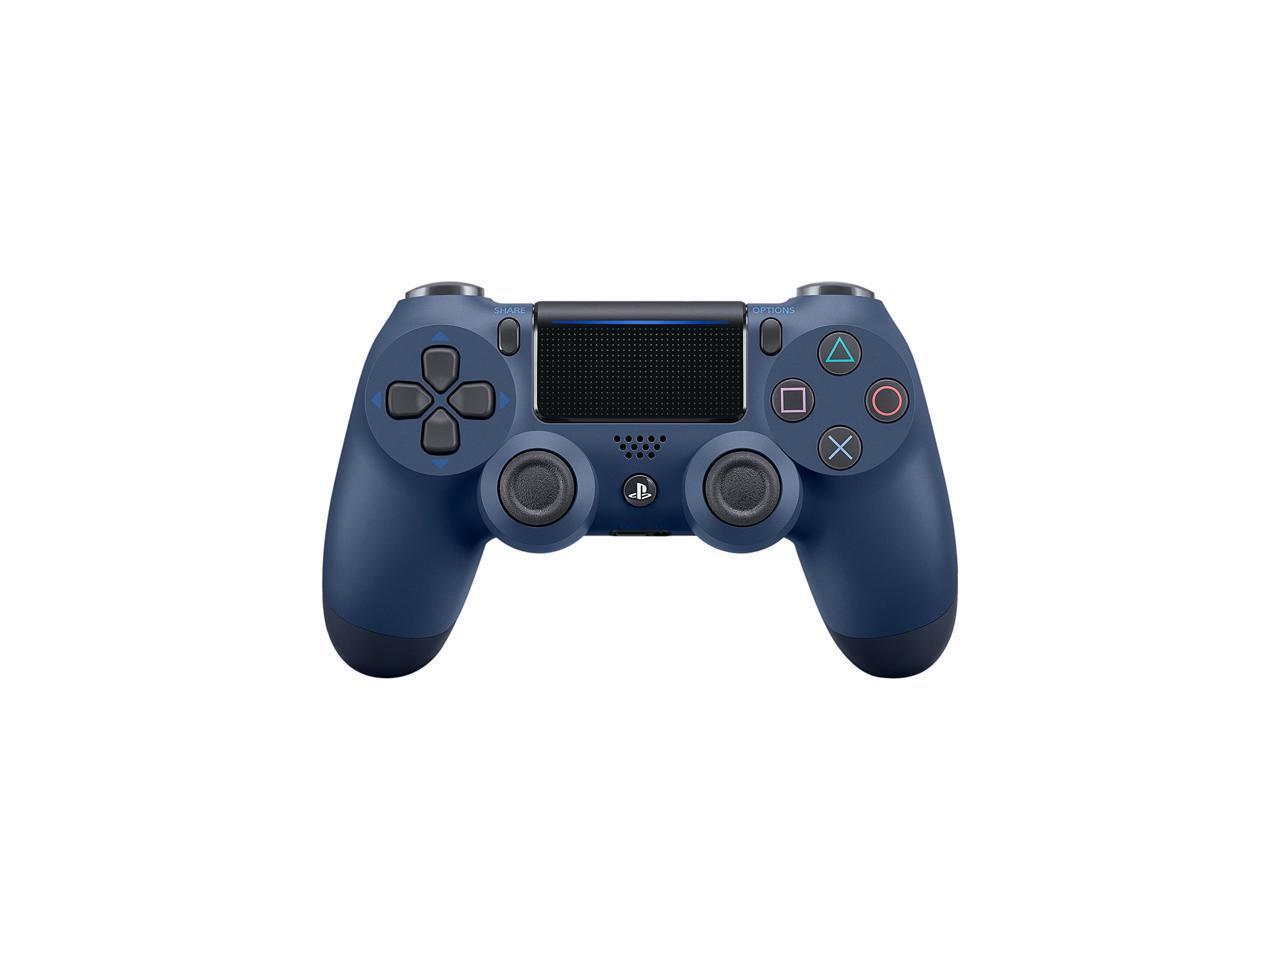 OEM DualShock 4 Wireless Controller for Sony PlayStation 4 - Midnight Blue (CUH-ZCT2)